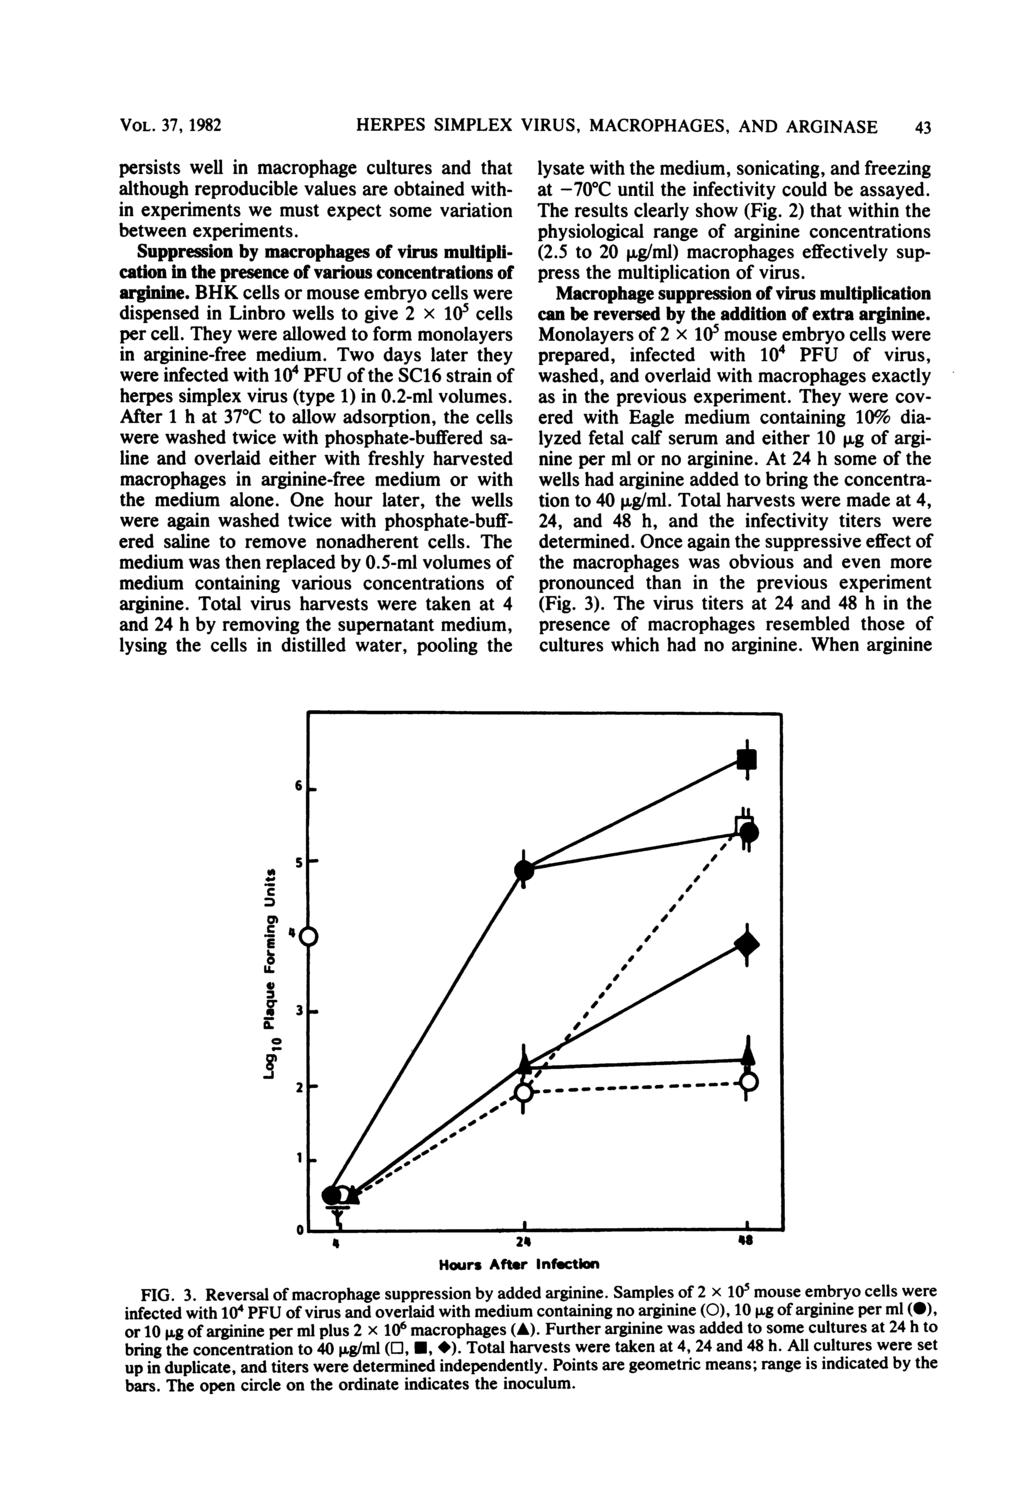 VOL. 37, 1982 persists well in macrophage cultures and that although reproducible values are obtained within experiments we must expect some variation between experiments.